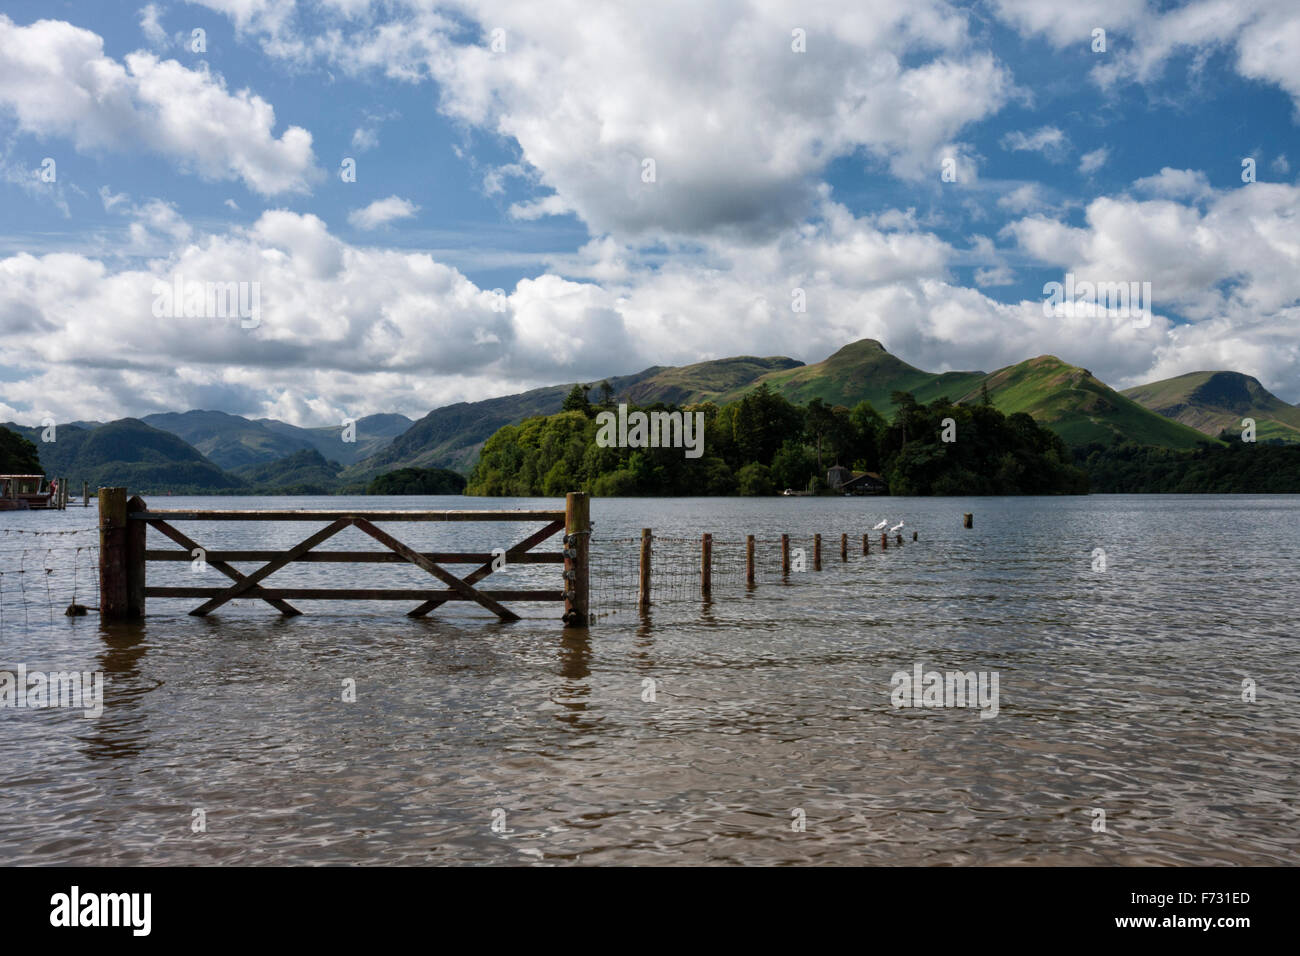 View of a gate and fence in a flooded Derwent Water looking towards Catbells, Keswick, Lake District, Cumbria, England, UK Stock Photo